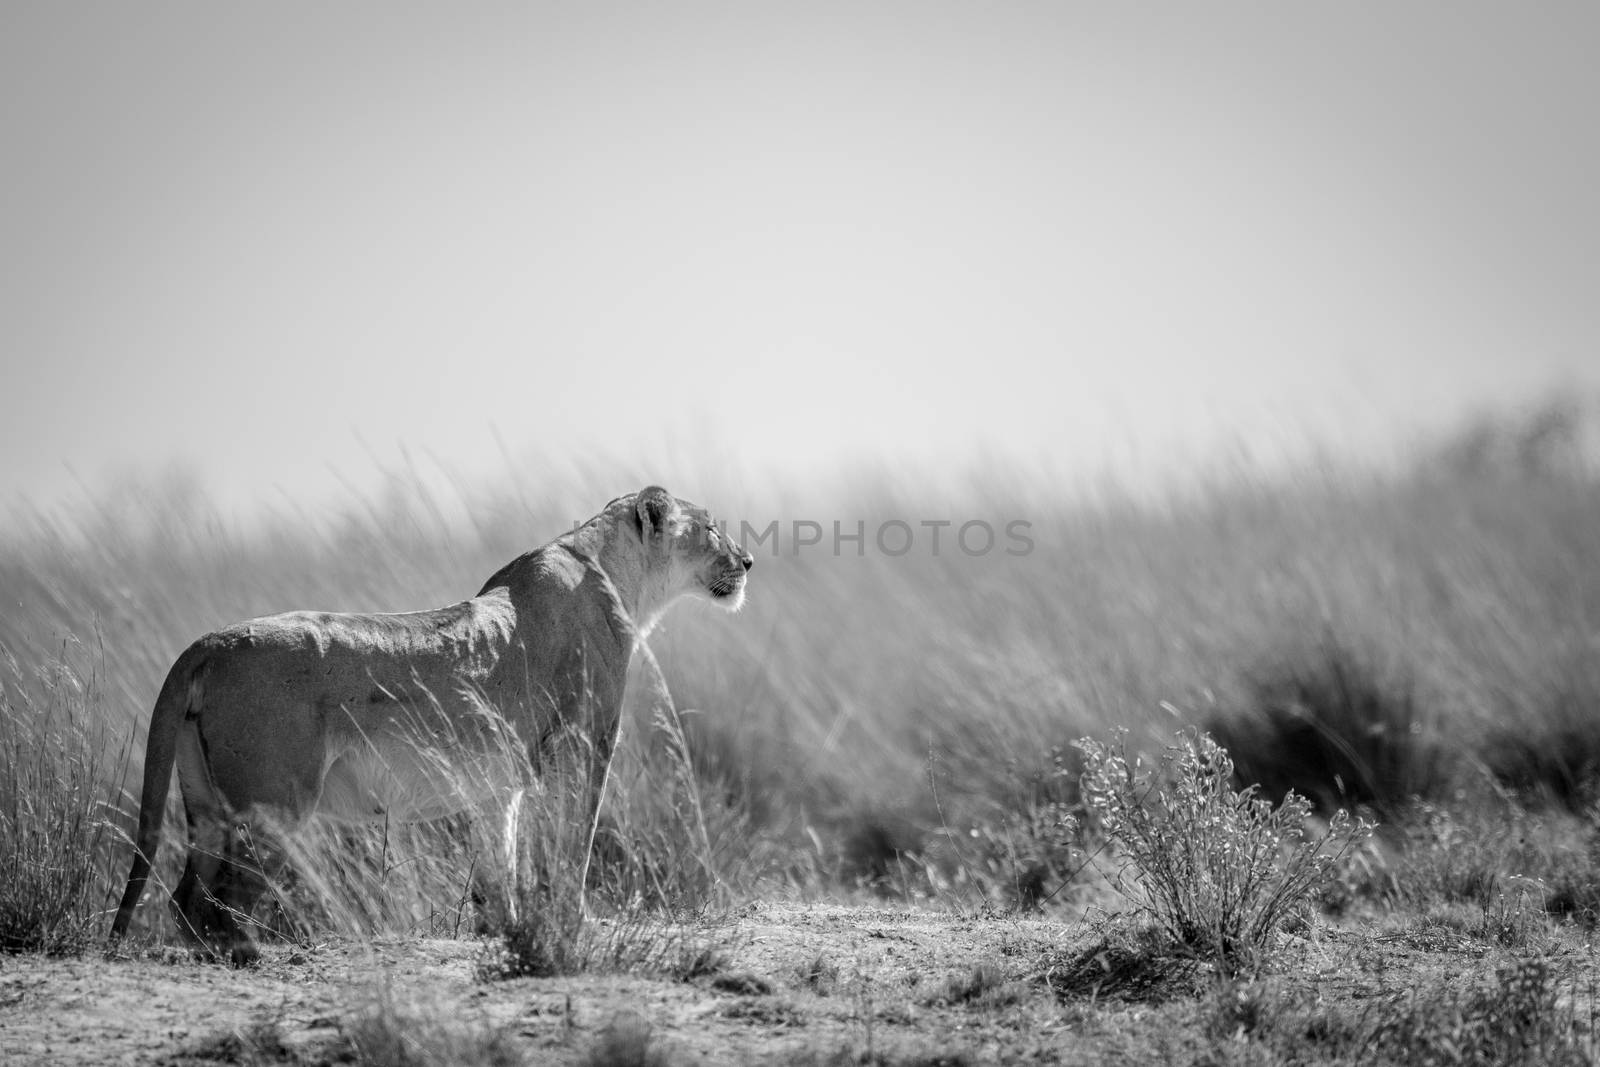 Lioness scanning the surroundings. by Simoneemanphotography